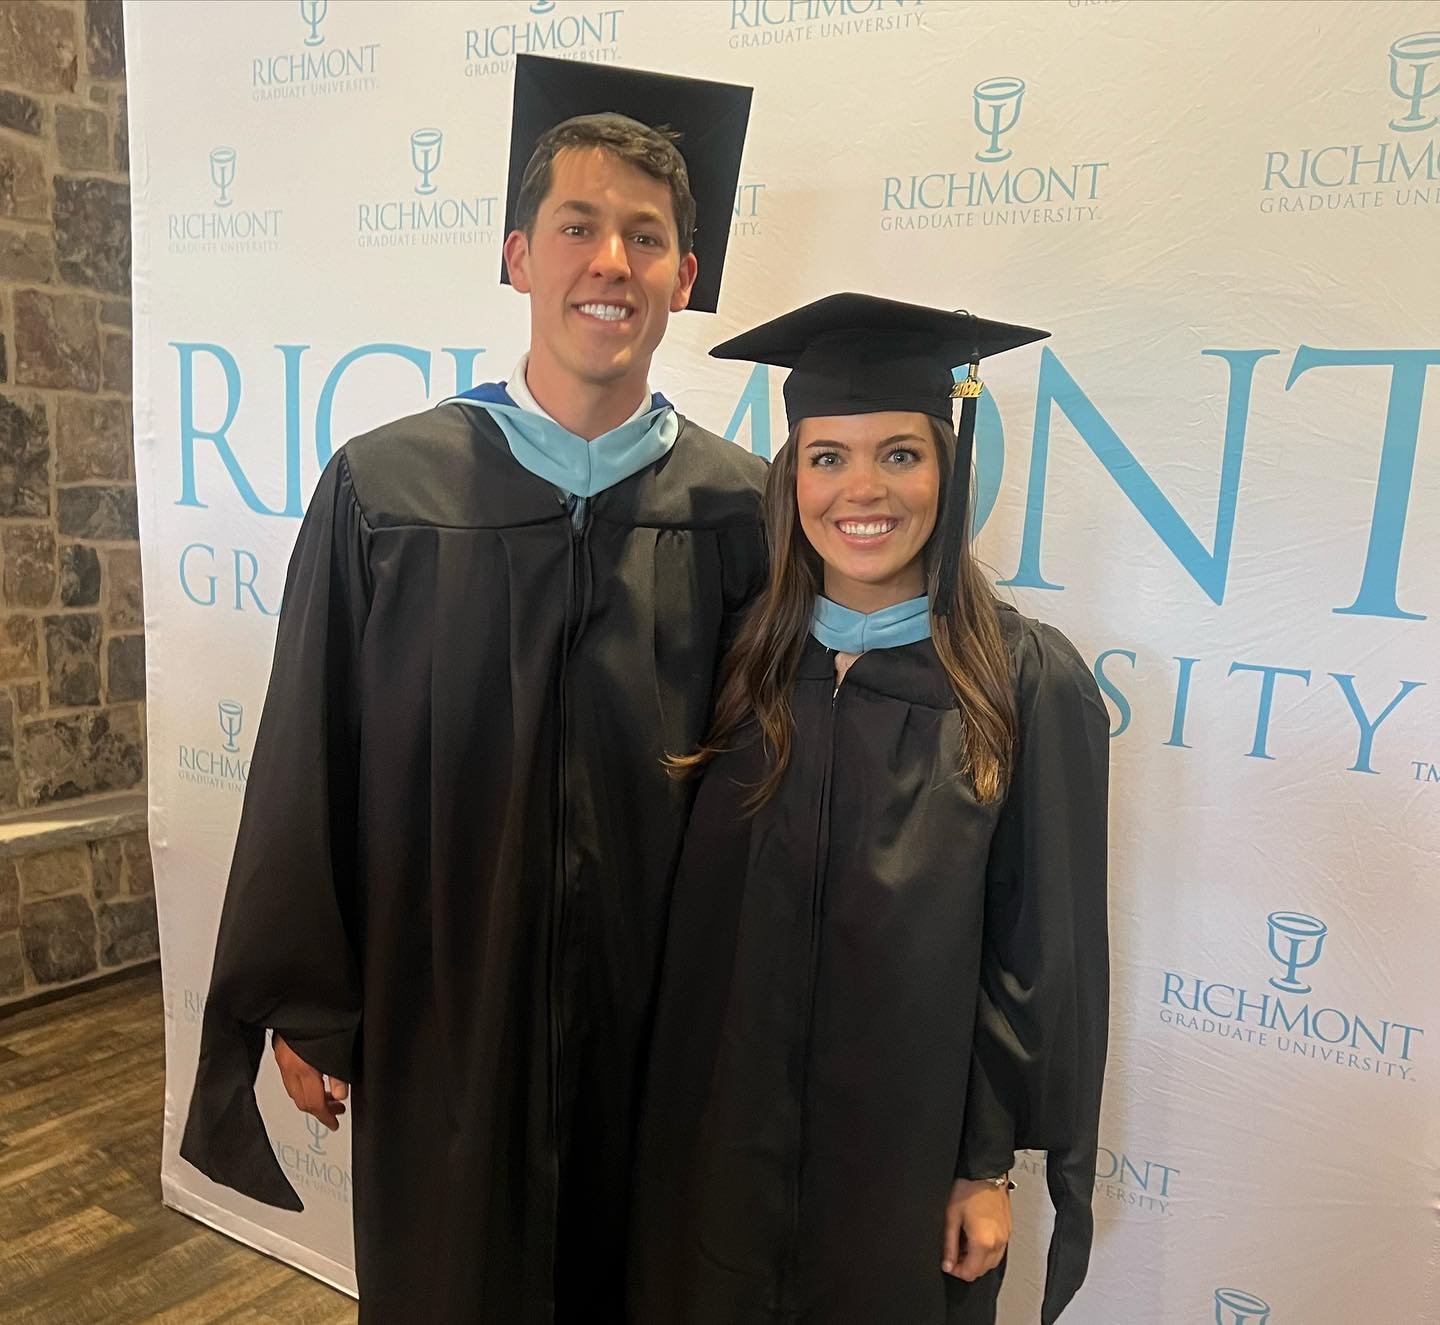 A huge congratulations to our graduating Clinical Interns, Anna Worden and Micah Moore! They&rsquo;re both graduating from Richmont Graduate University with a Masters in Clinical Mental Health Counseling and both staying on our team. We couldn&rsquo;